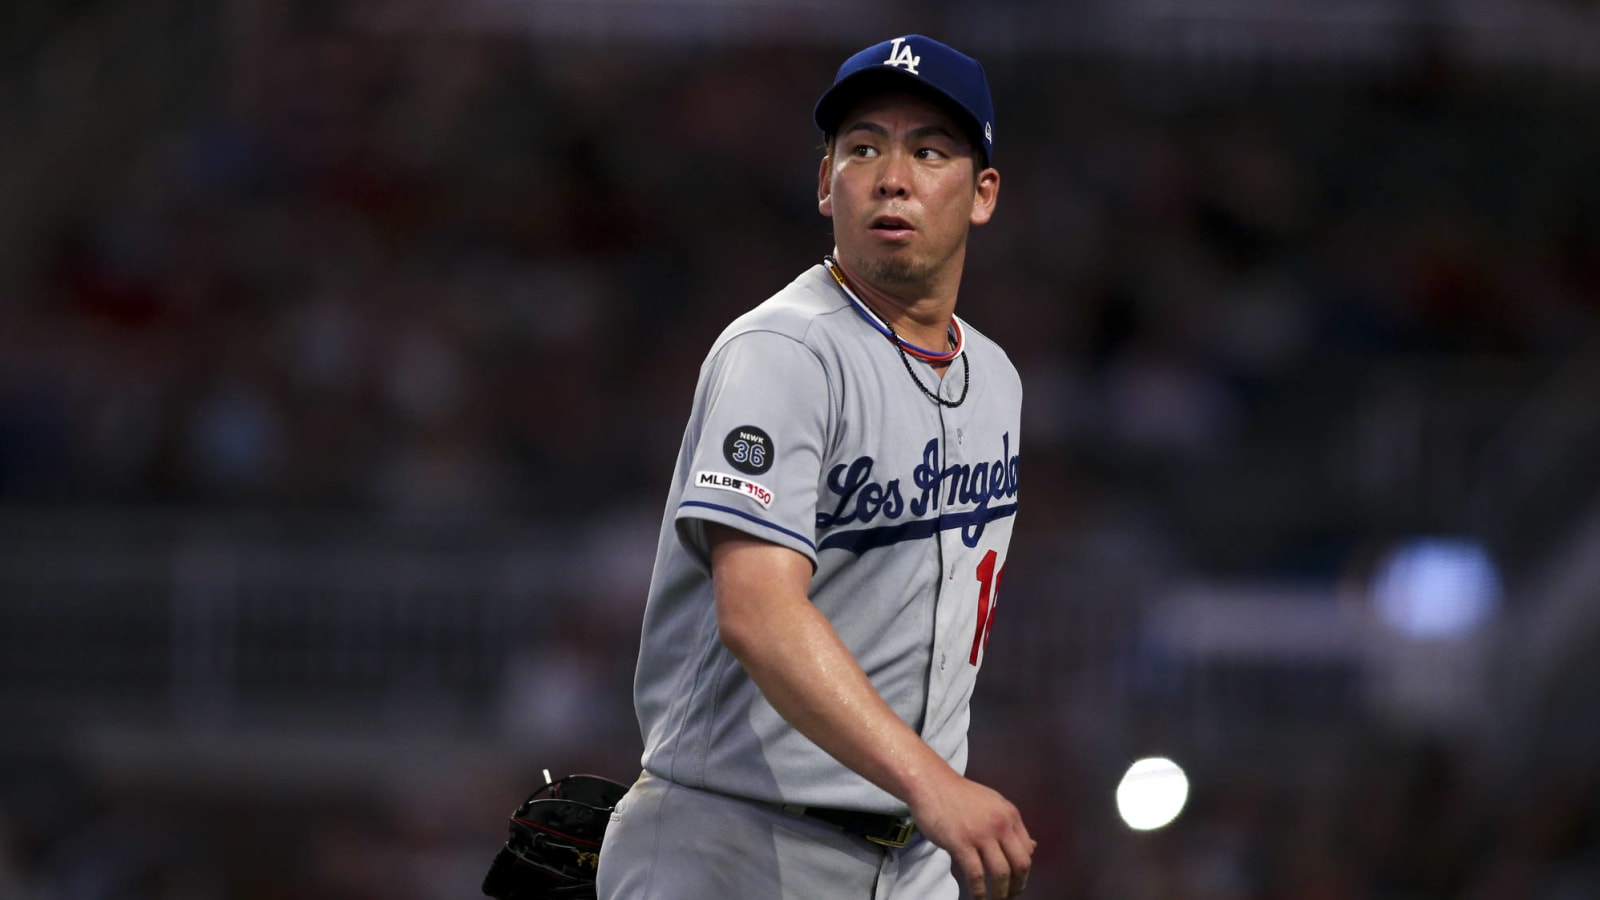 Kenta Maeda to Twins, Brusdar Graterol to Red Sox as part of massive trade